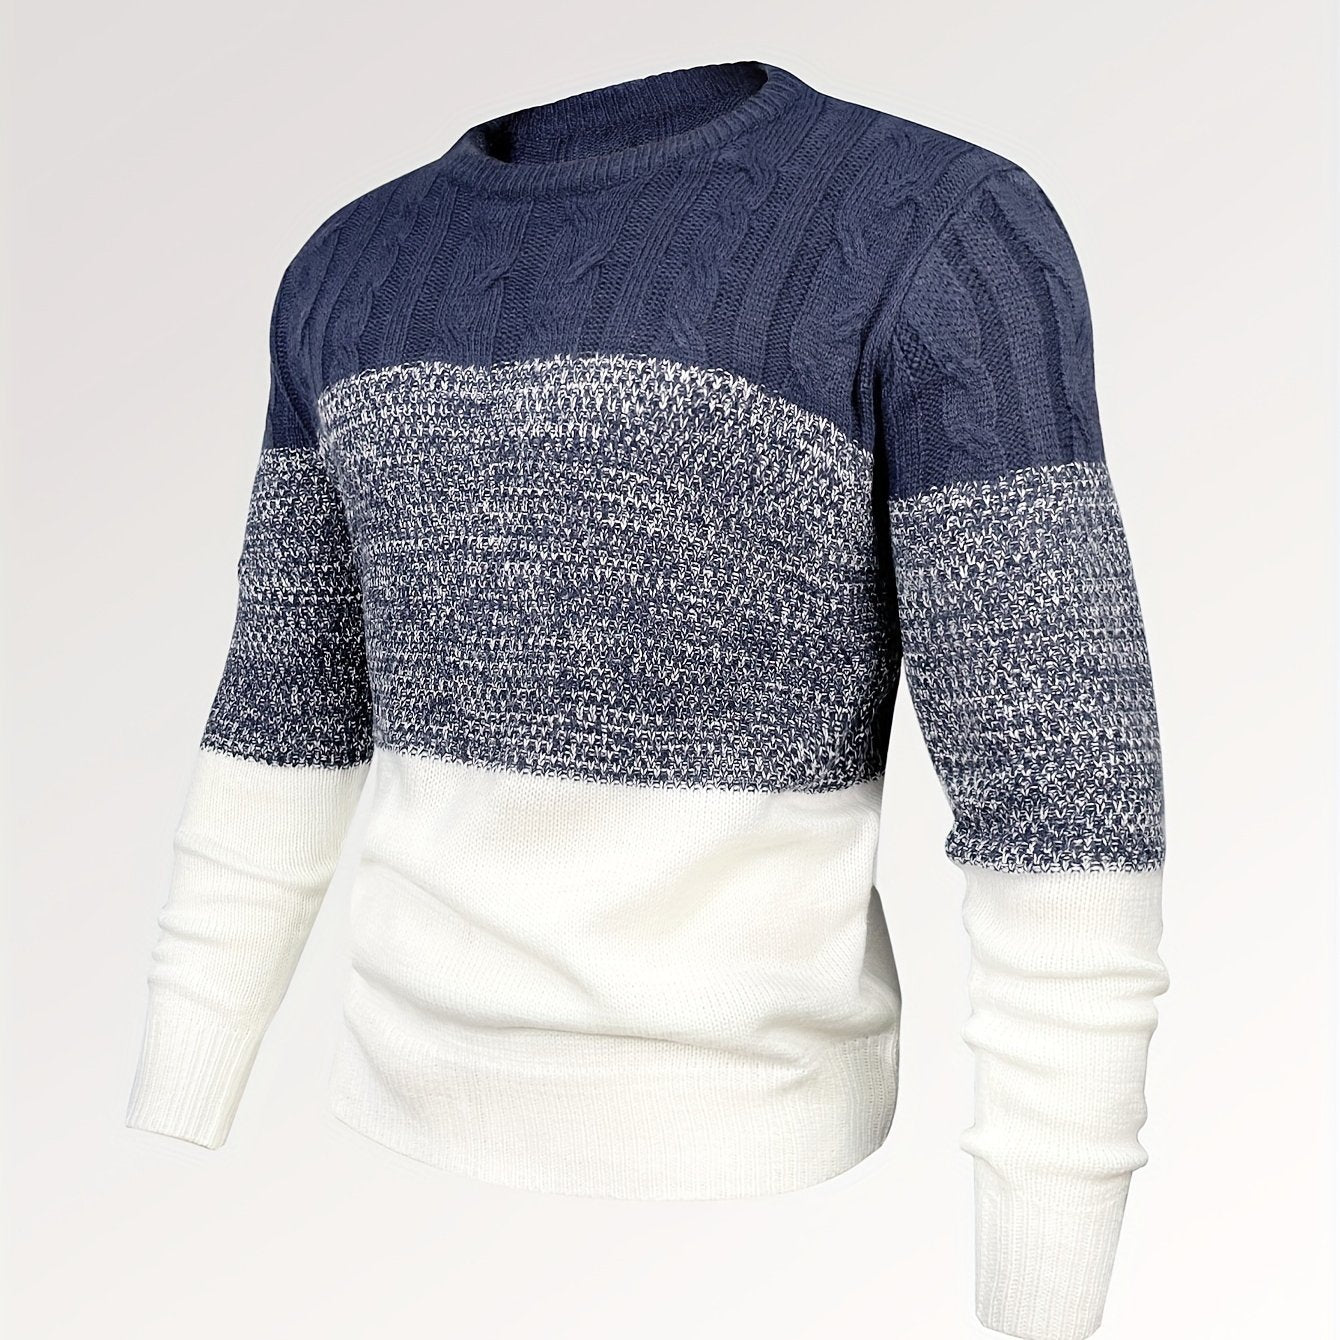 Foruwish - All Match Knitted Cable Sweater, Men's Casual Warm Slightly Stretch Crew Neck Pullover Sweater For Men Fall Winter